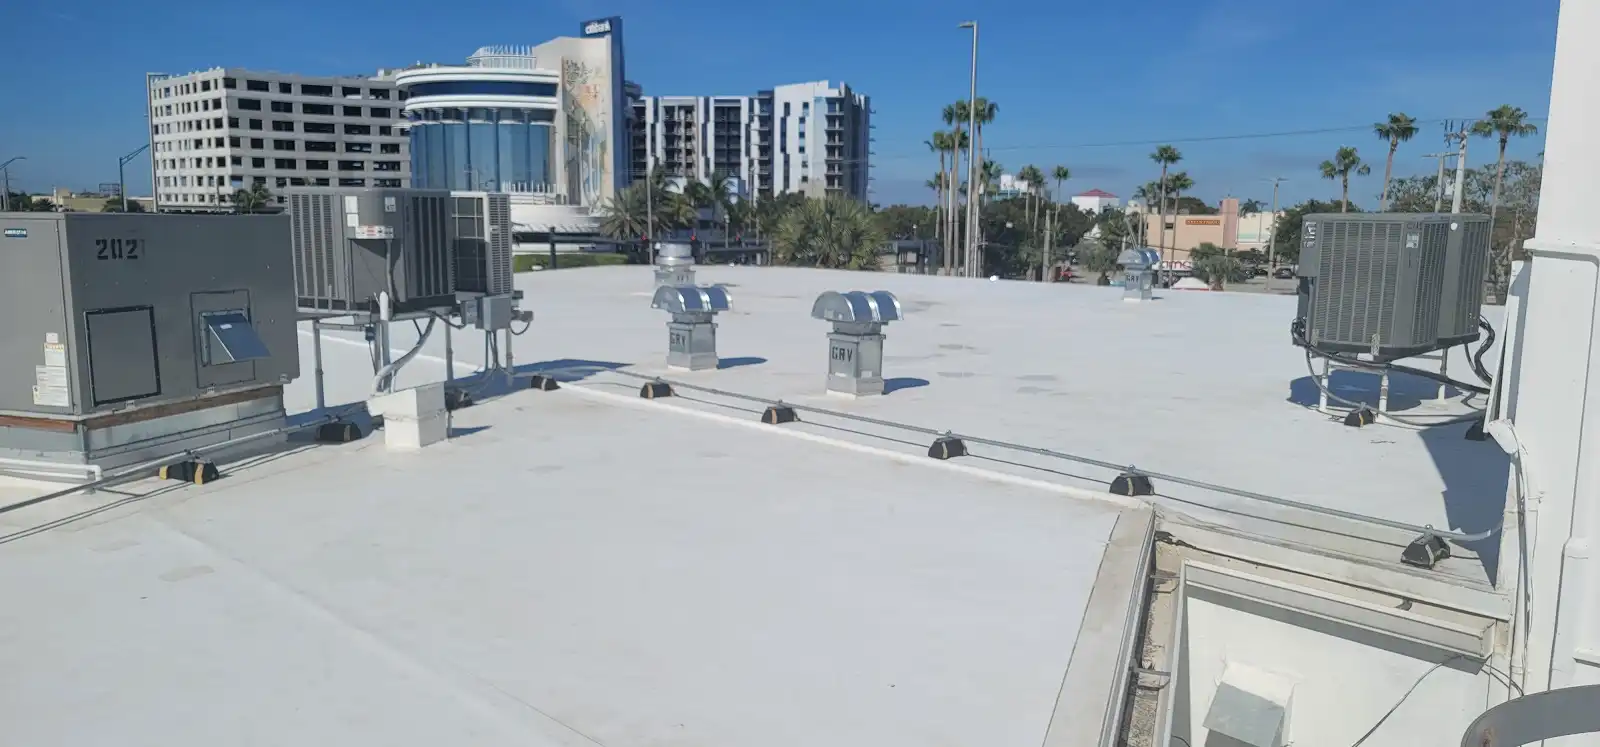 Tpo roof on a commercial building